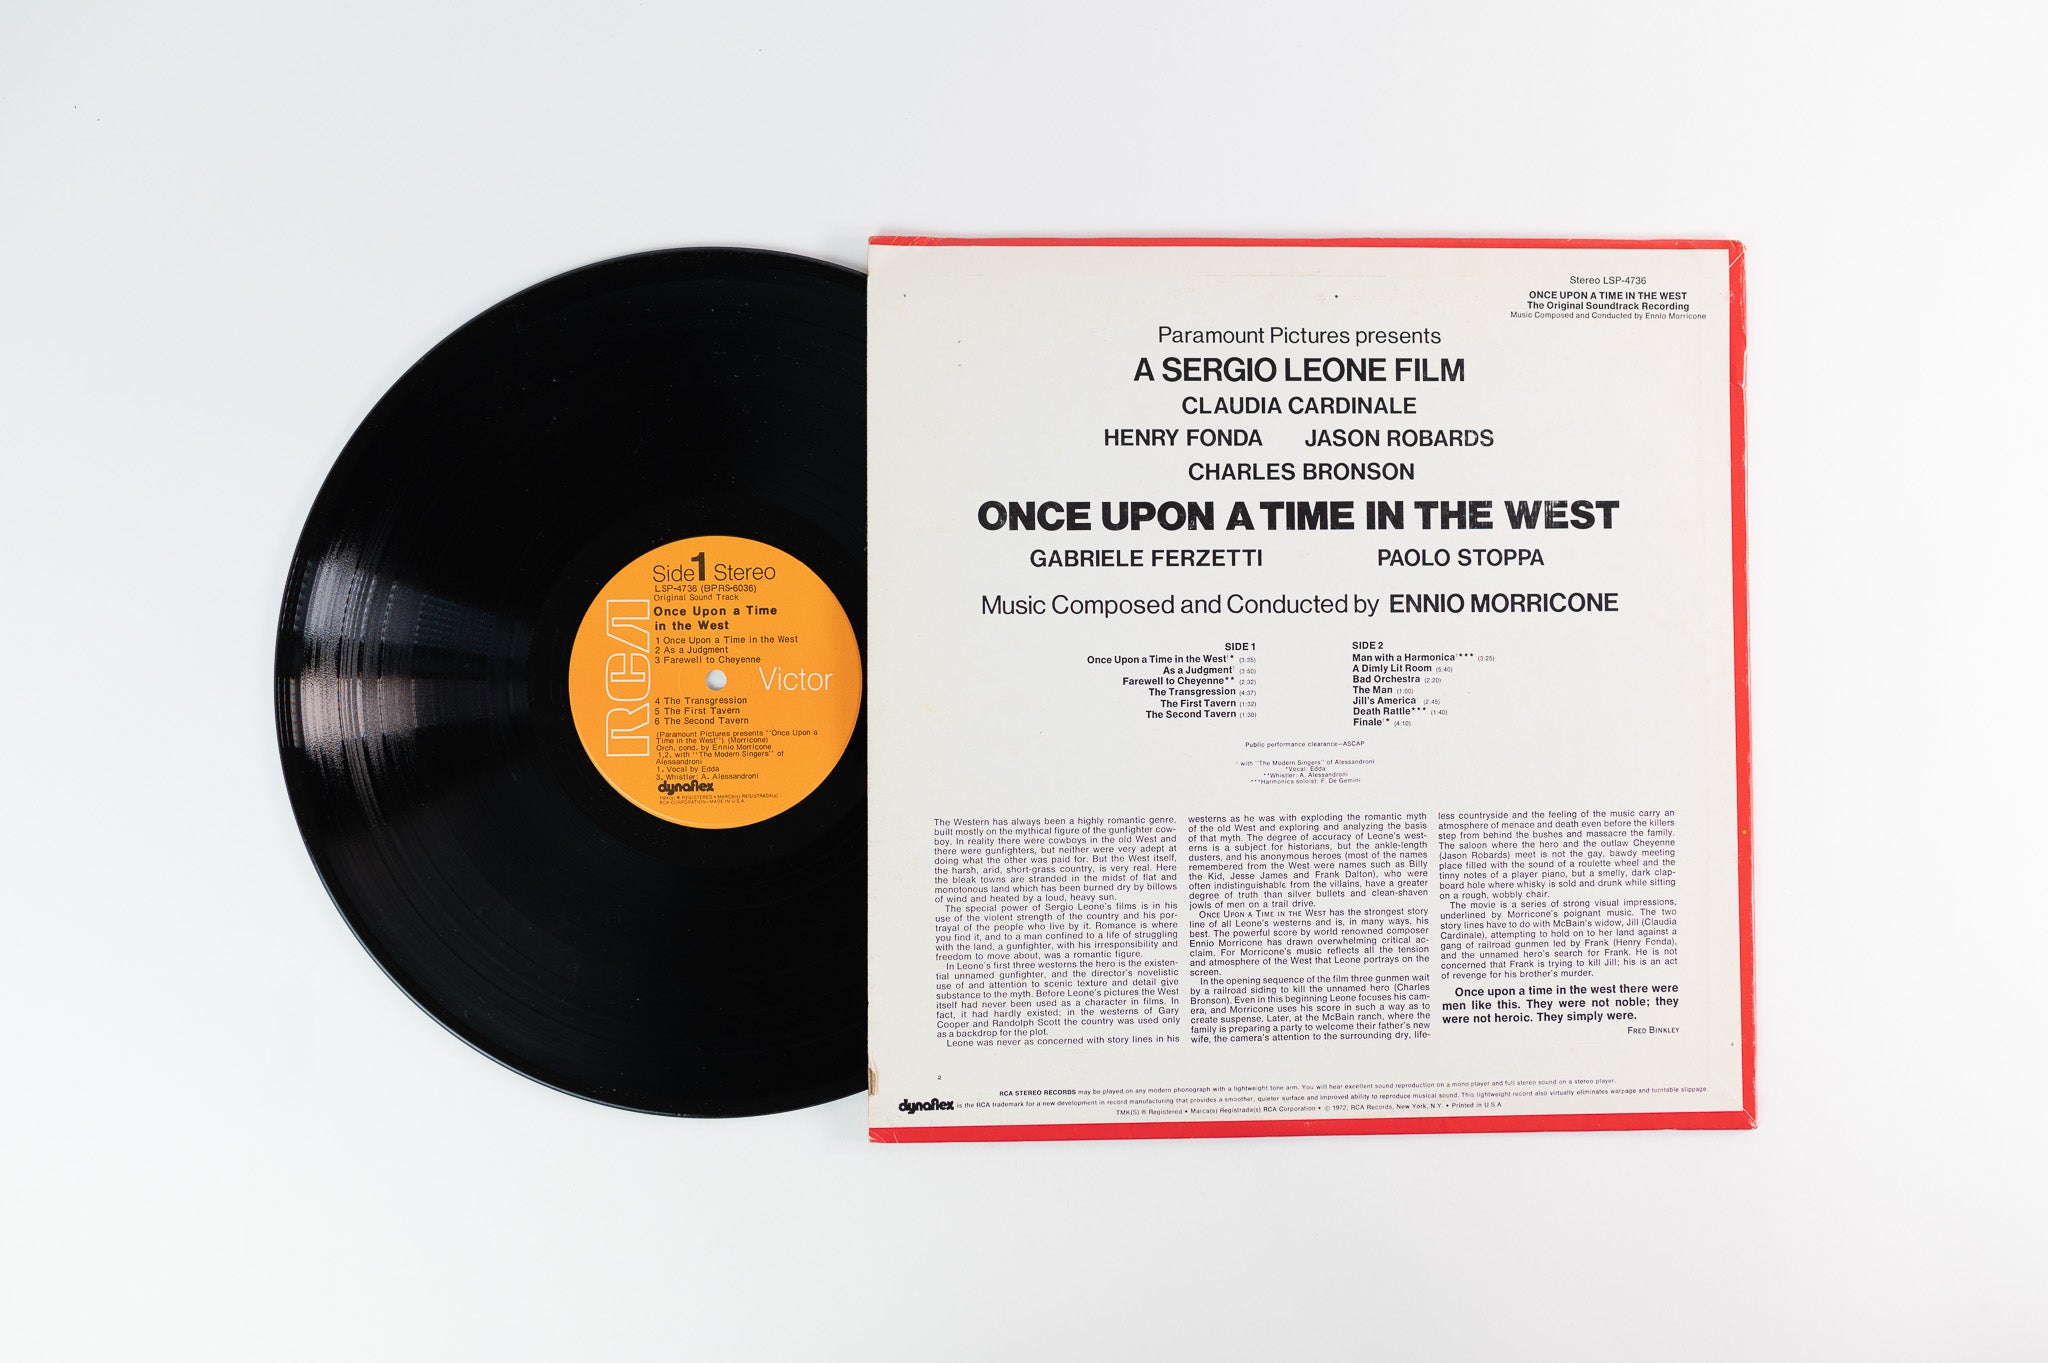 Ennio Morricone - Once Upon A Time In The West Original Soundtrack on RCA